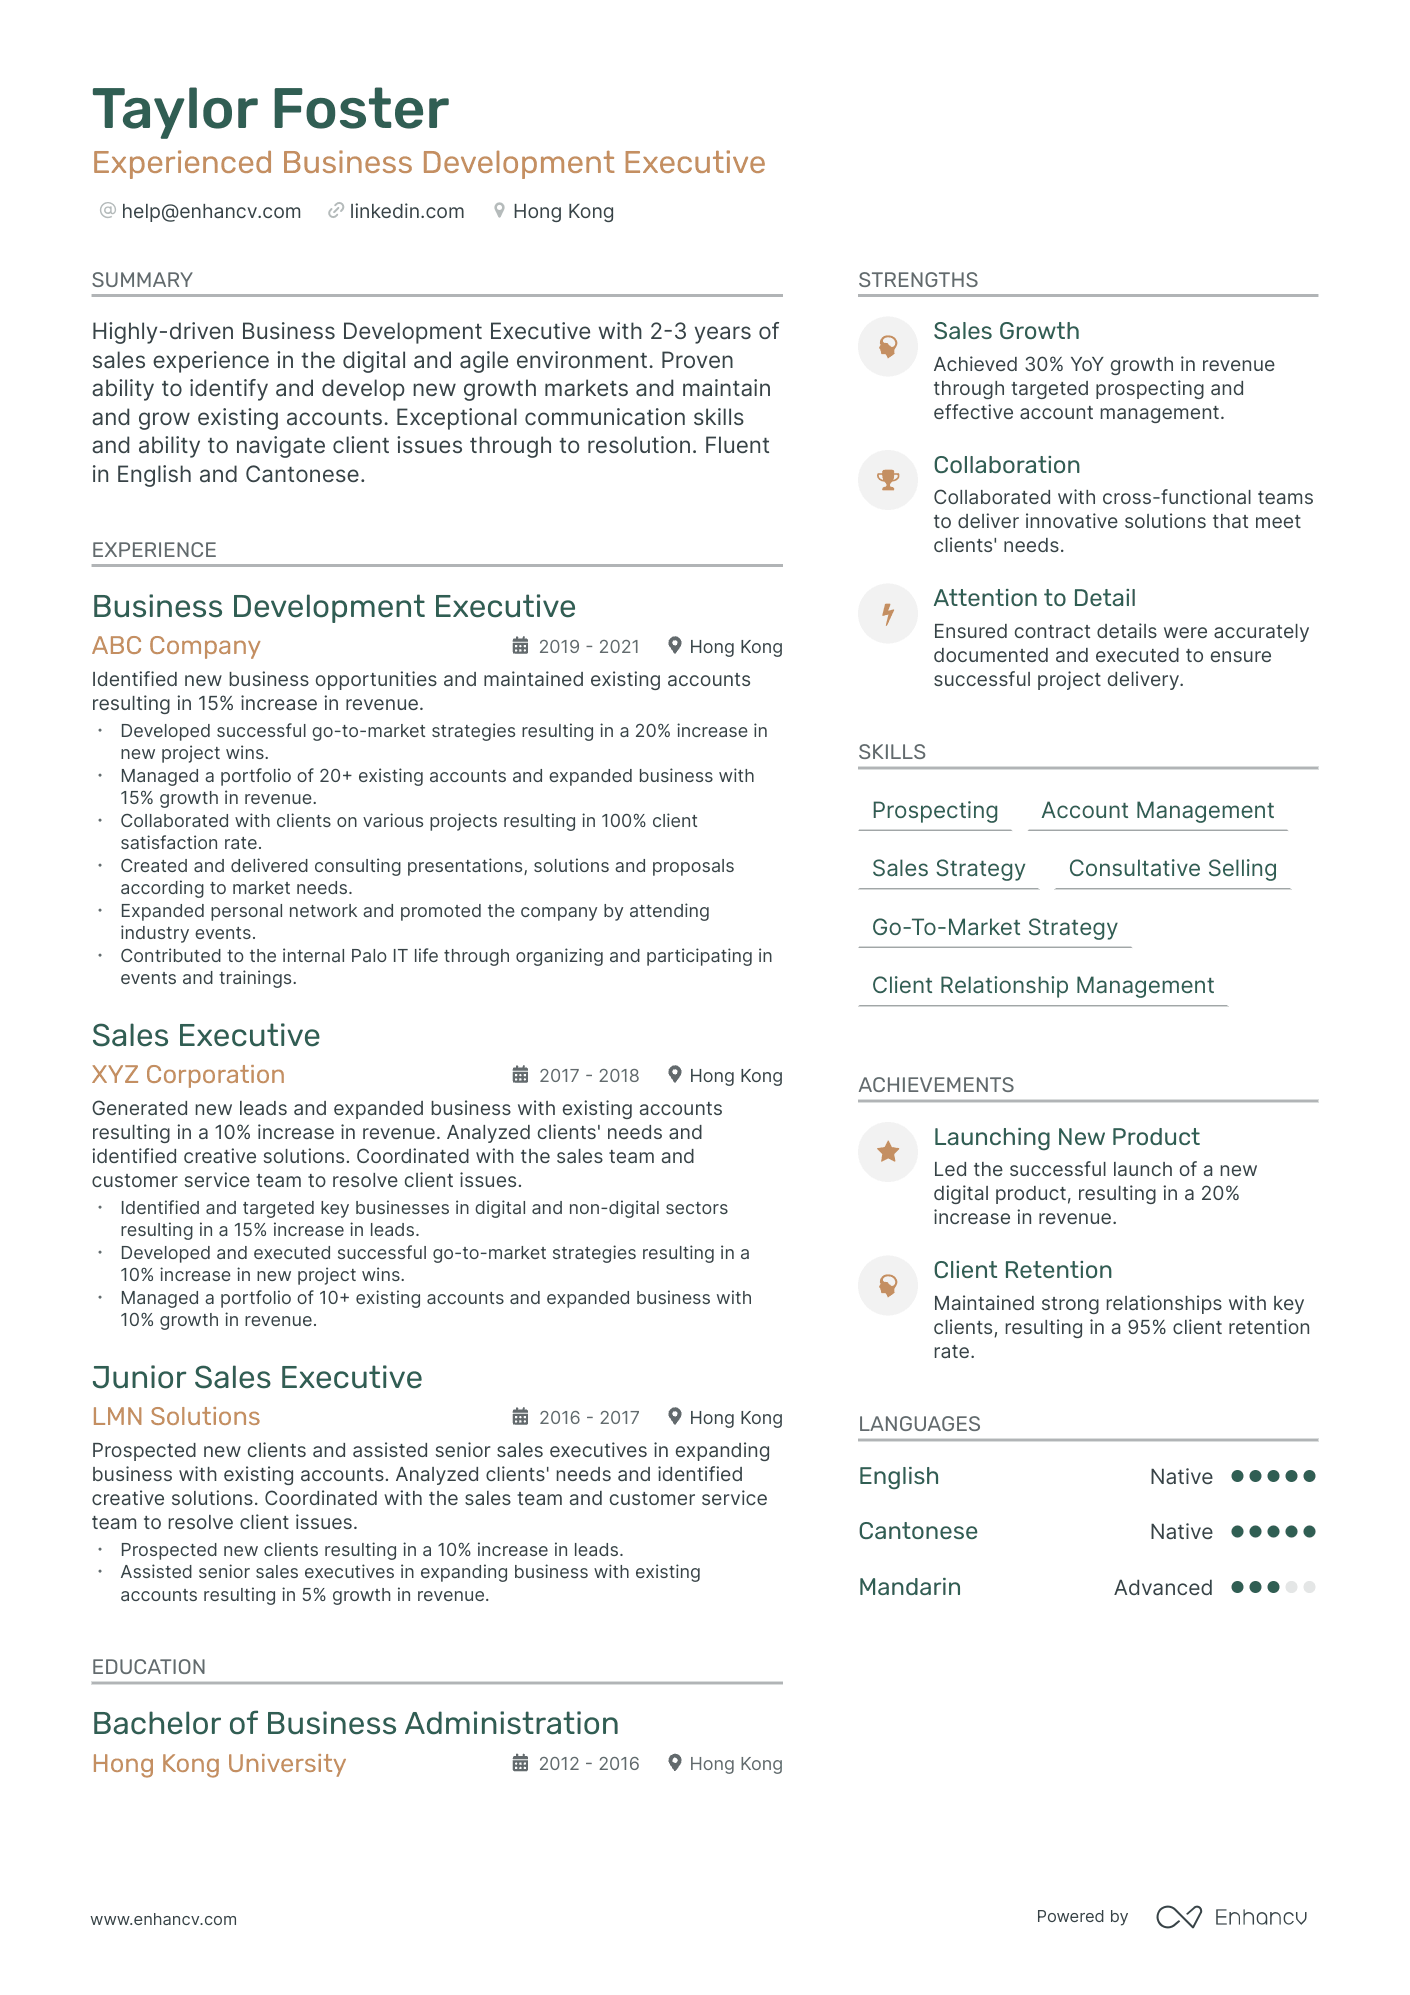 resume for business development manager